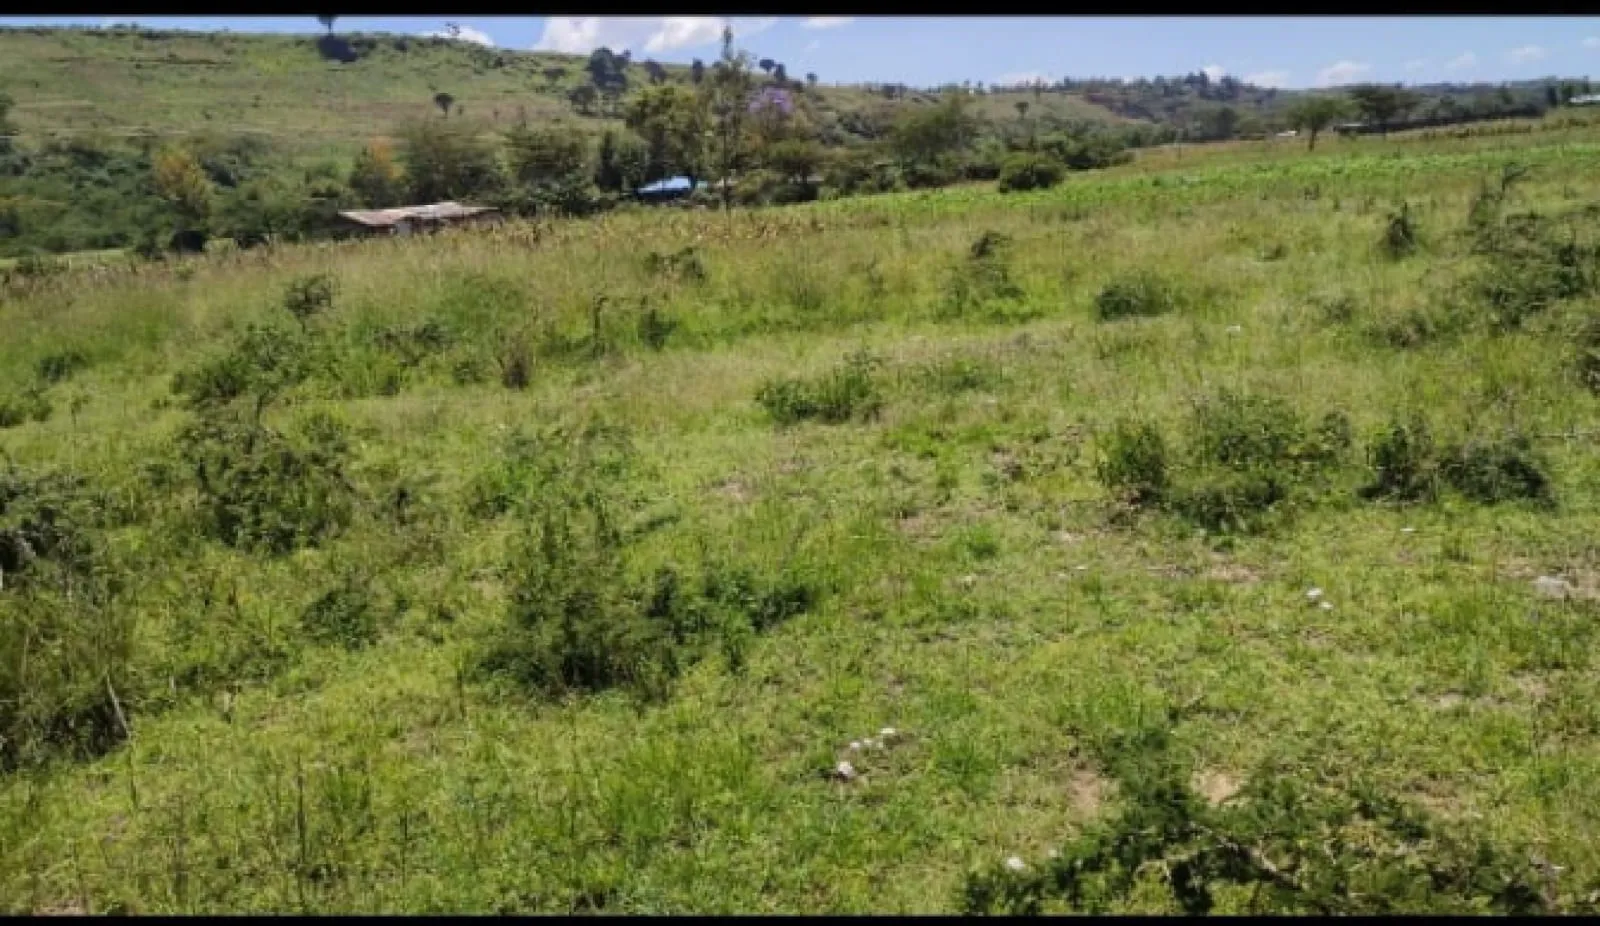 Land For Sale Real Estate-1/2 Acre Meririshwa Mbaruk Clean Tittle Deed Cheapest! 3